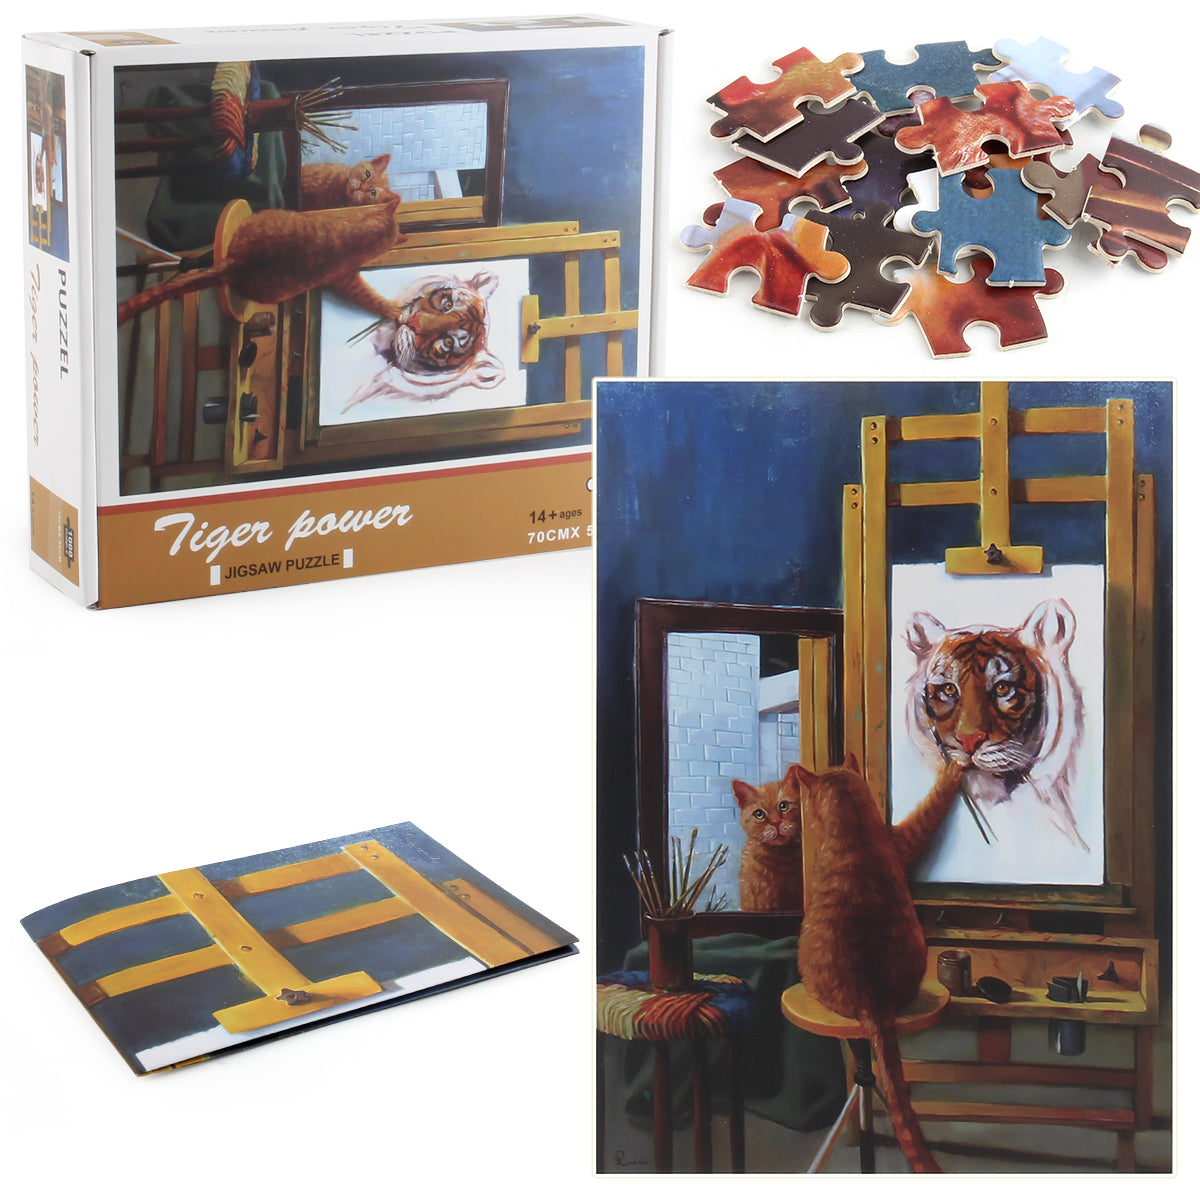 Tiger Power Wooden 1000 Piece Jigsaw Puzzle Toy For Adults and Kids